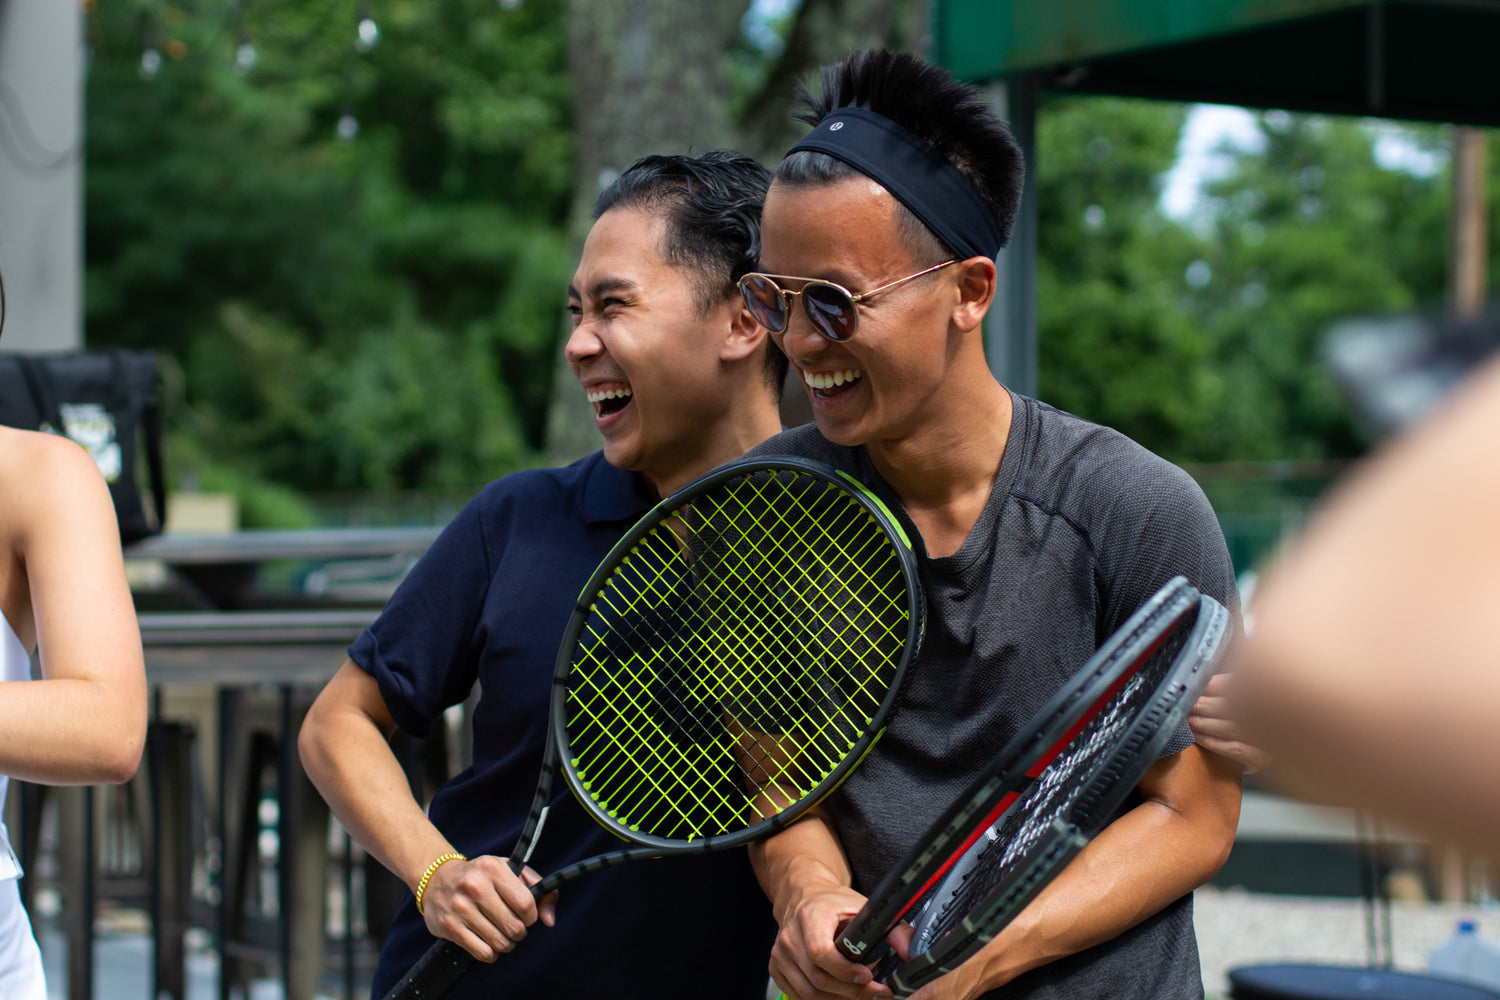 First annual Asian American Dream Open organizer brings communities together through the love of the game